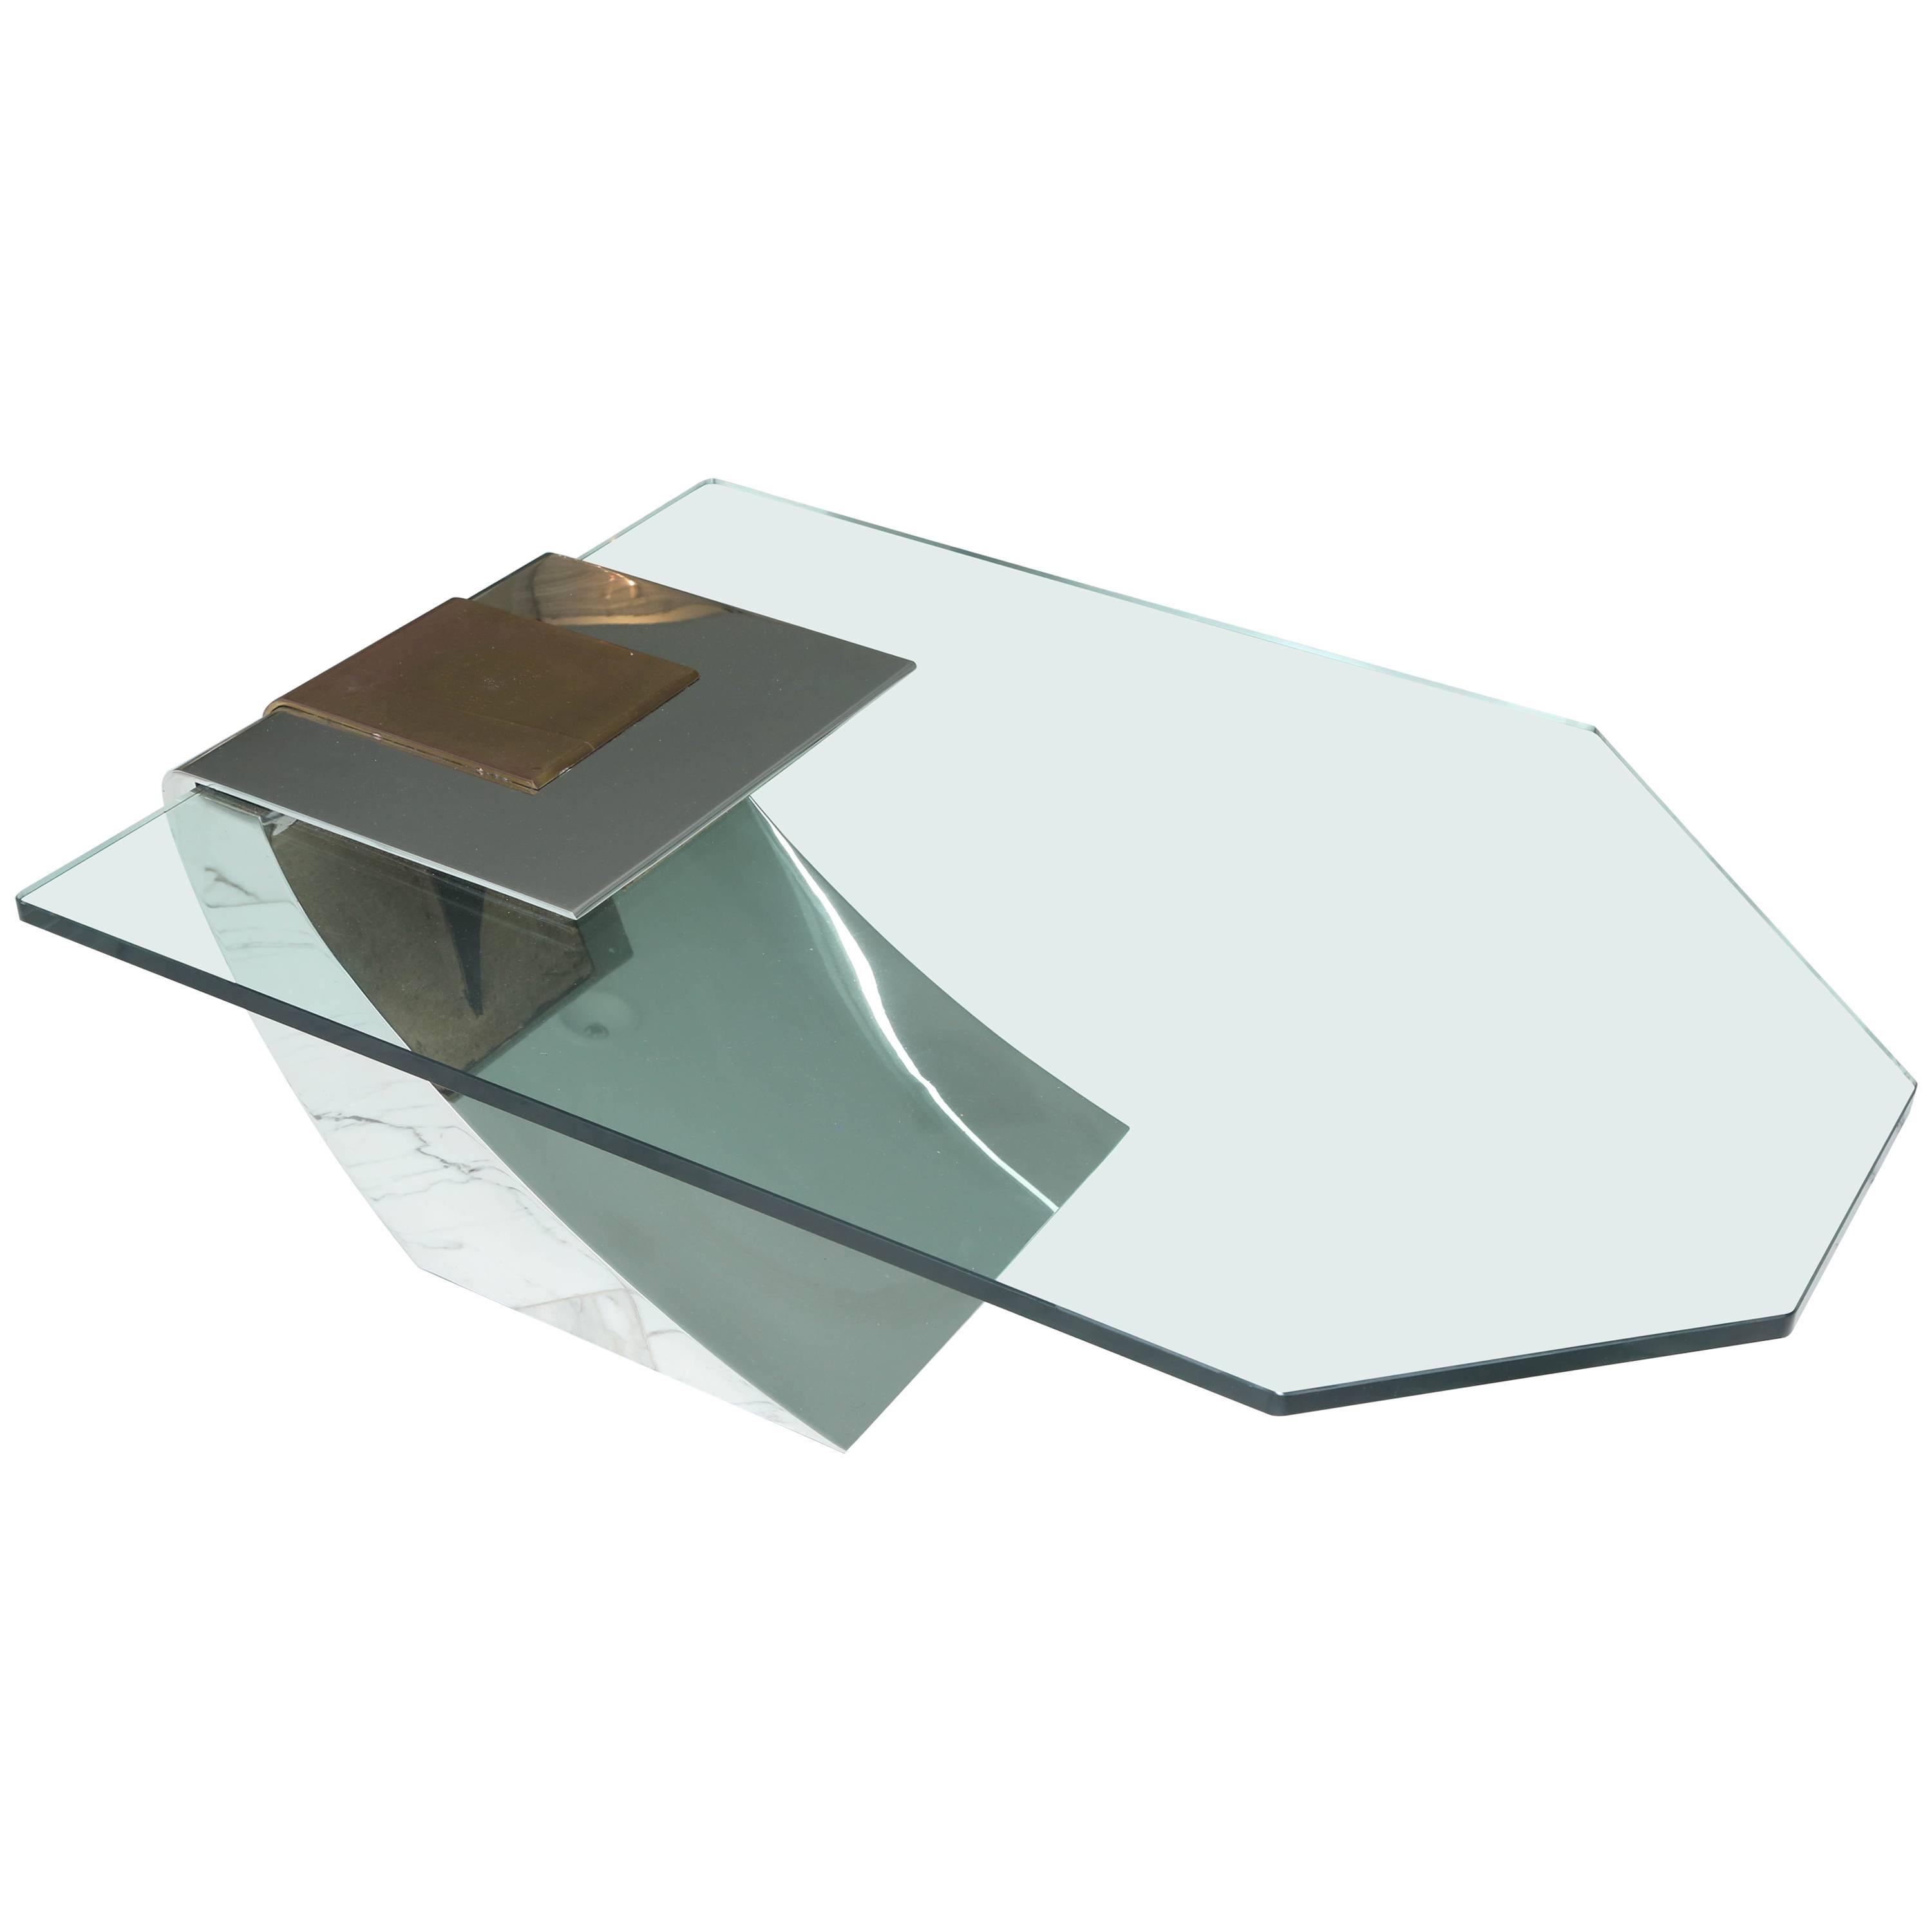 Chrome and Brass Cantilevered Coffee Table